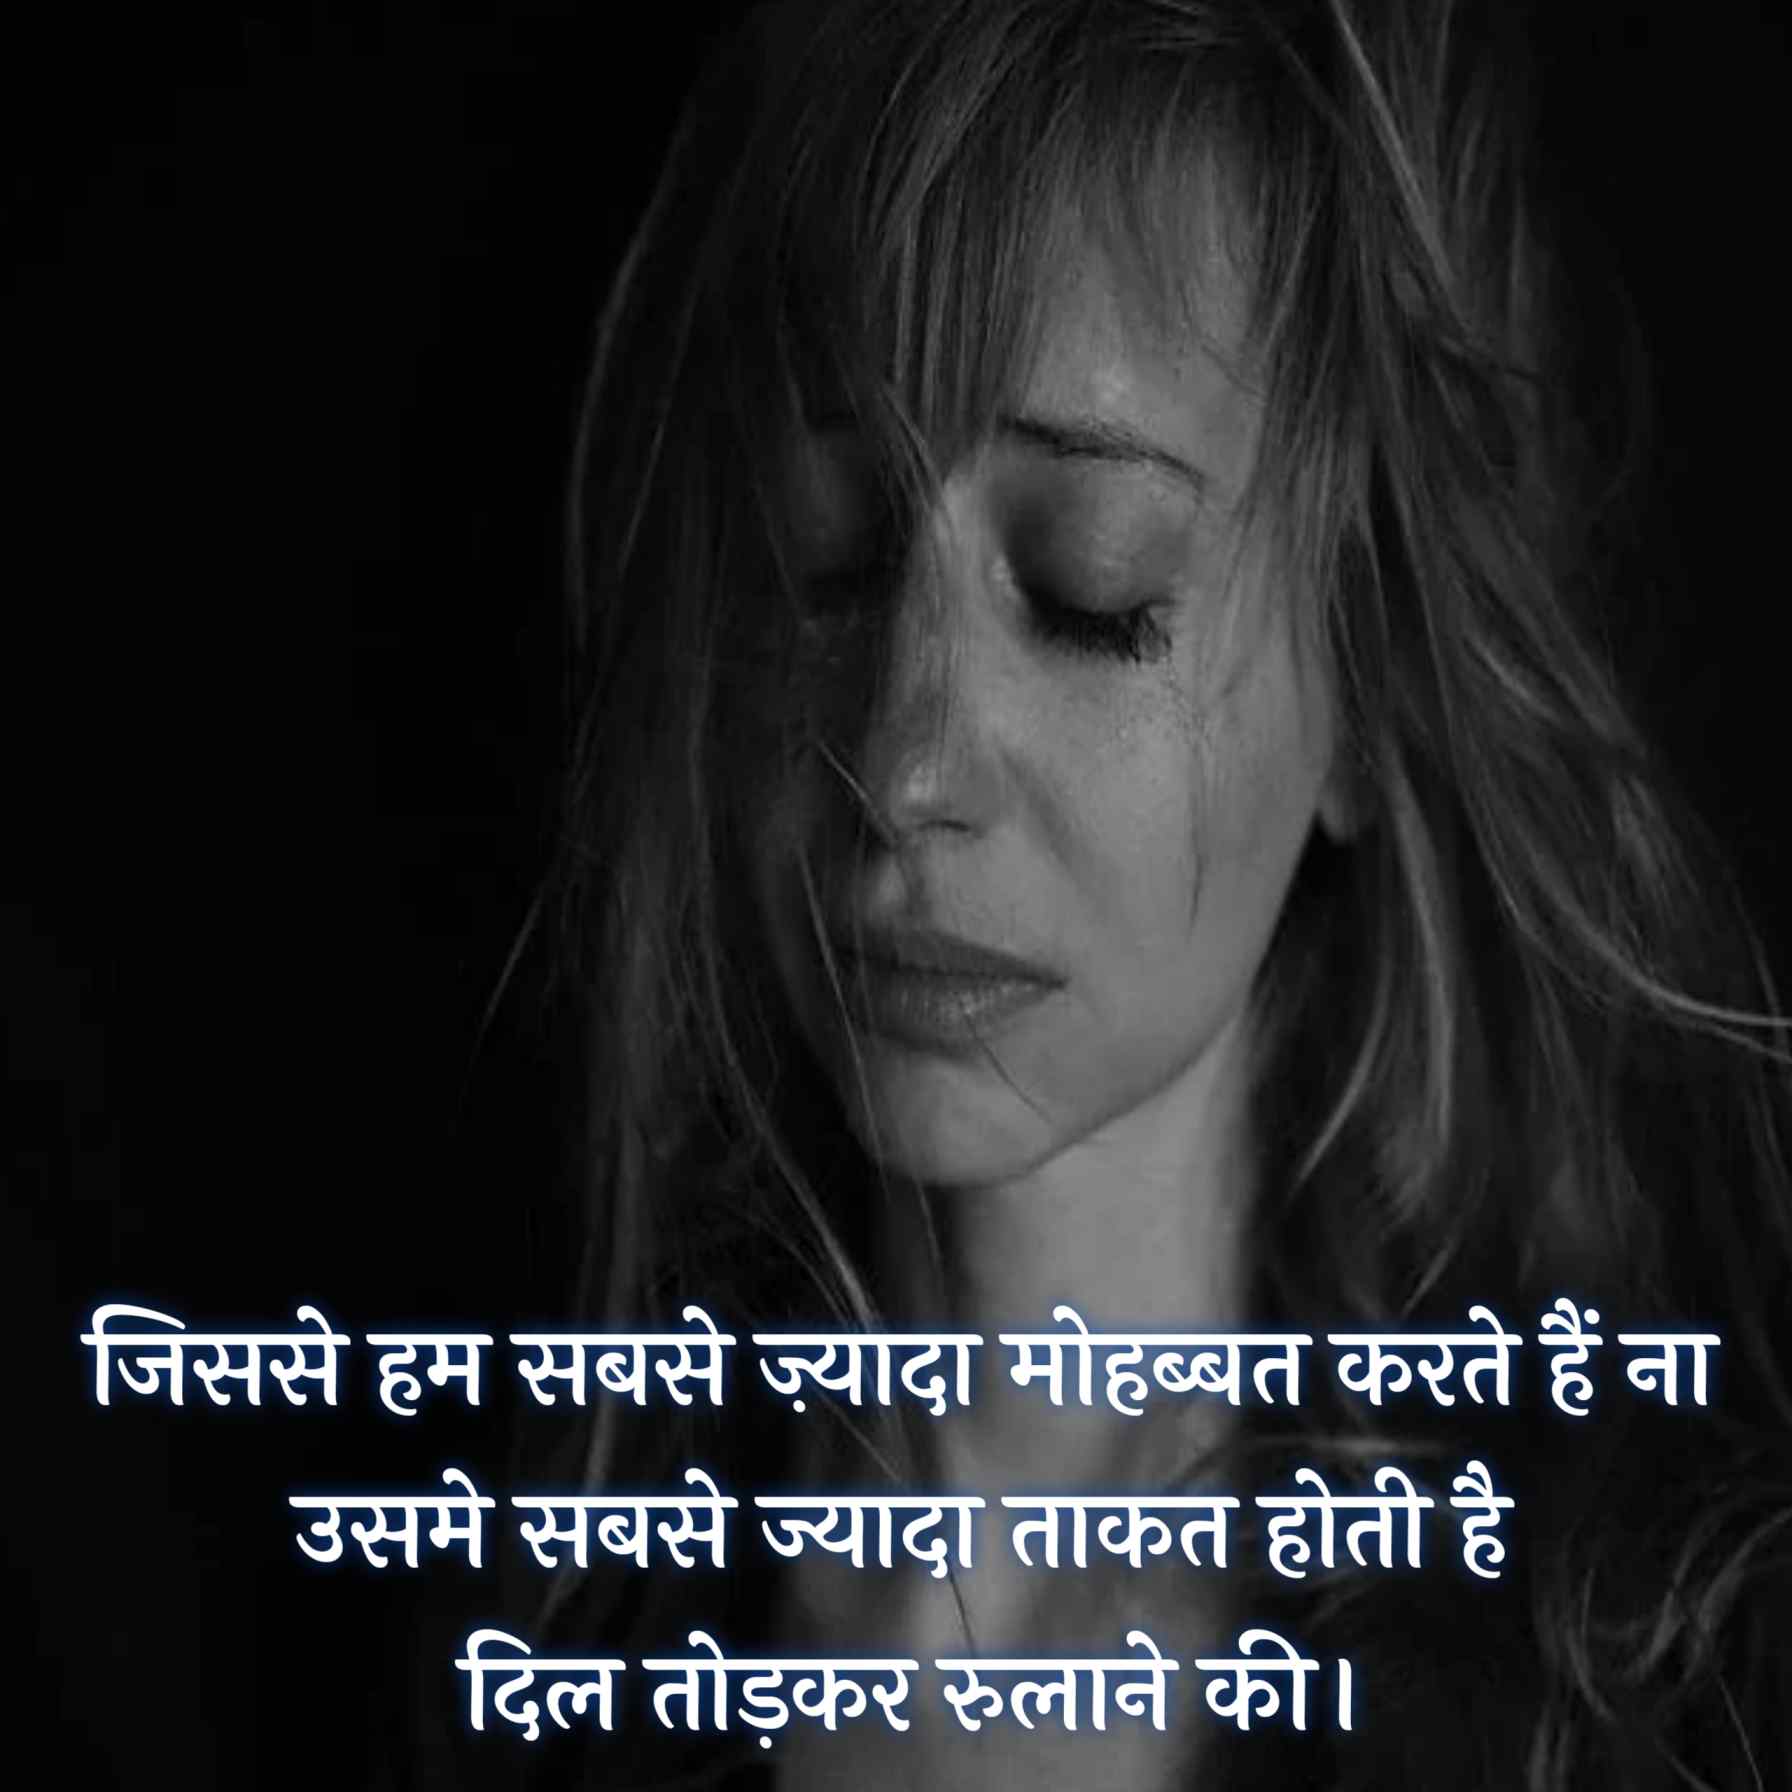 100+ Very Sad Love Quotes In Hindi With Images 2022 | Sad Pyar Breakup Quotes